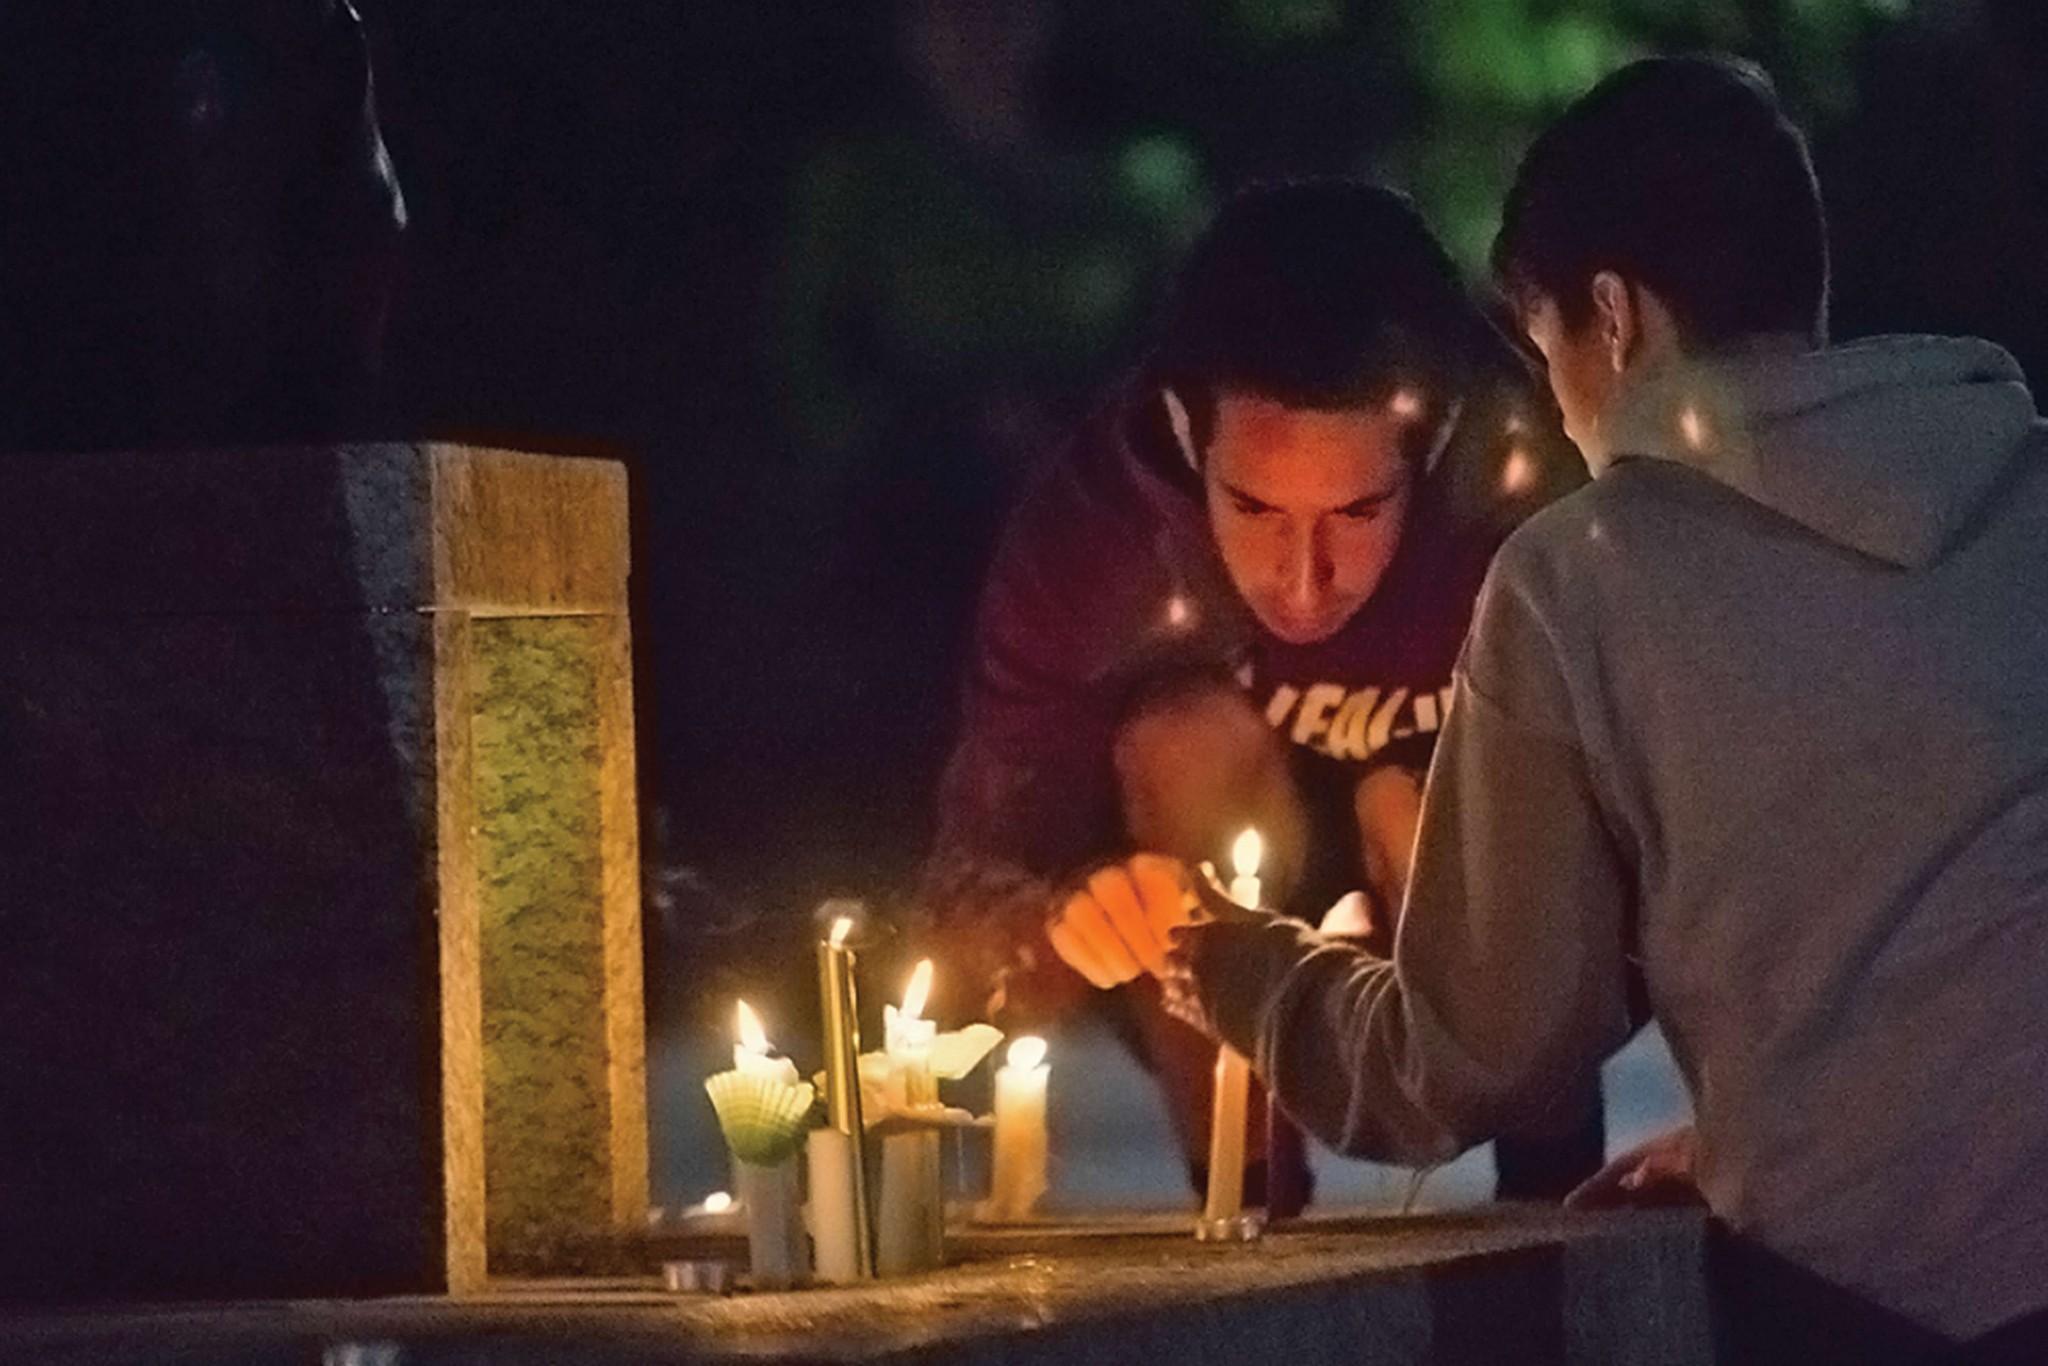 Students+lighting+candles+on+Sanford+Mall+last+year+at+the+vigil+held+in+honor+of+Anna+Smith.+Smith+was+found+deceased+in+the+woods+after+11+days+of+being+missing.